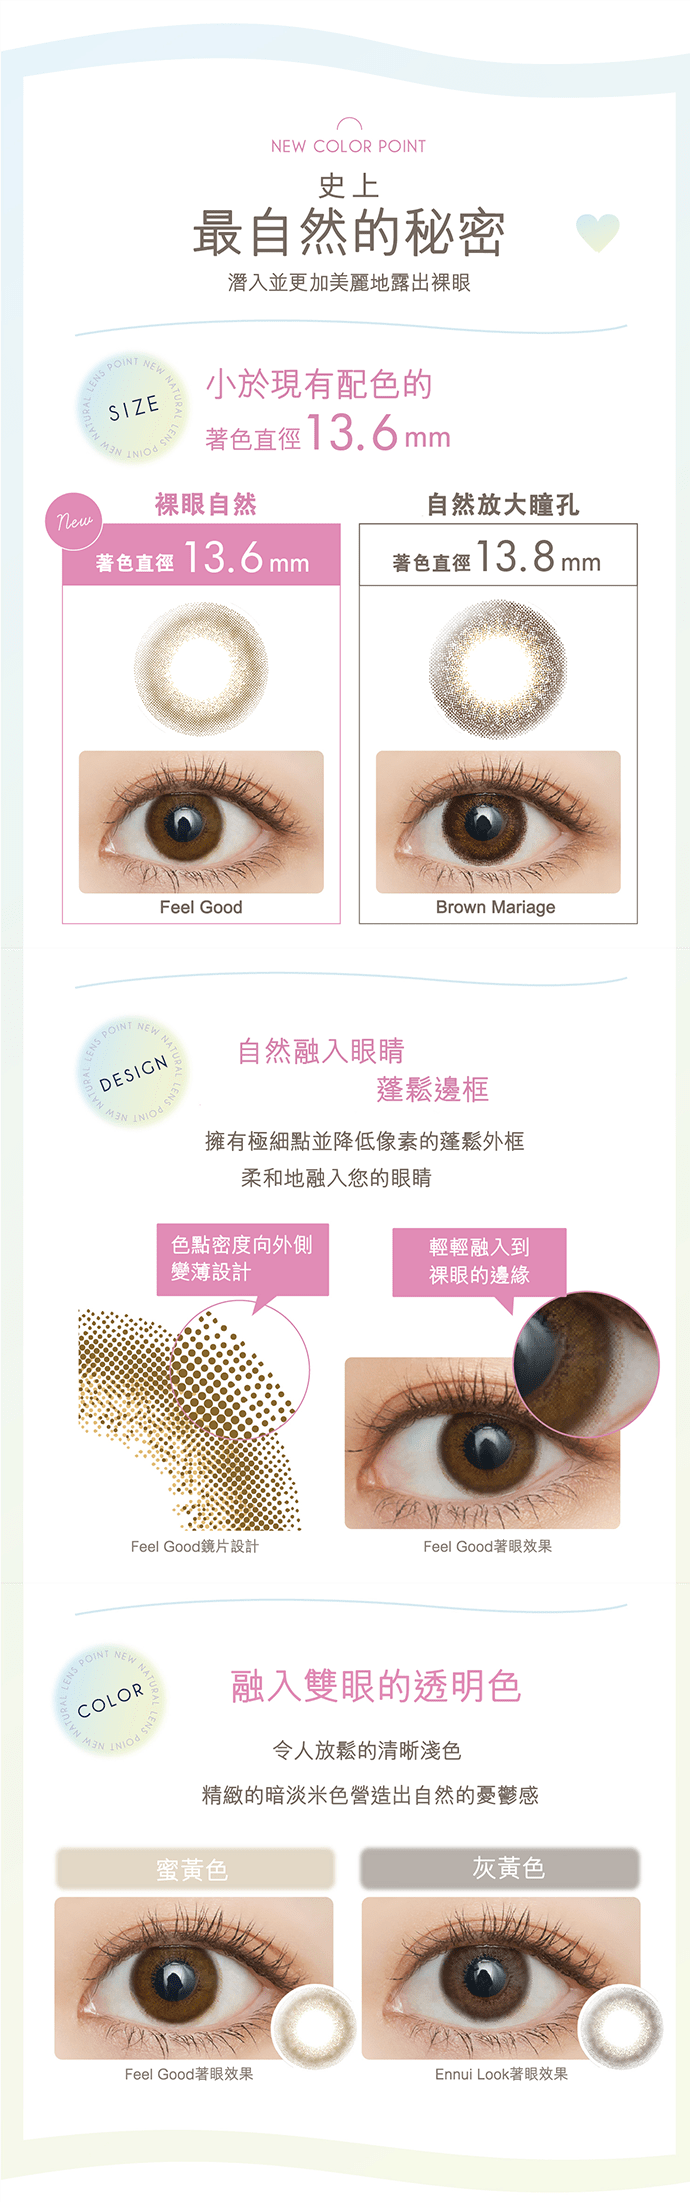 EverColor 1 Day Natural Moist Label UV Silhouette Duo 有色每日抛棄隱形眼鏡 (20片裝)